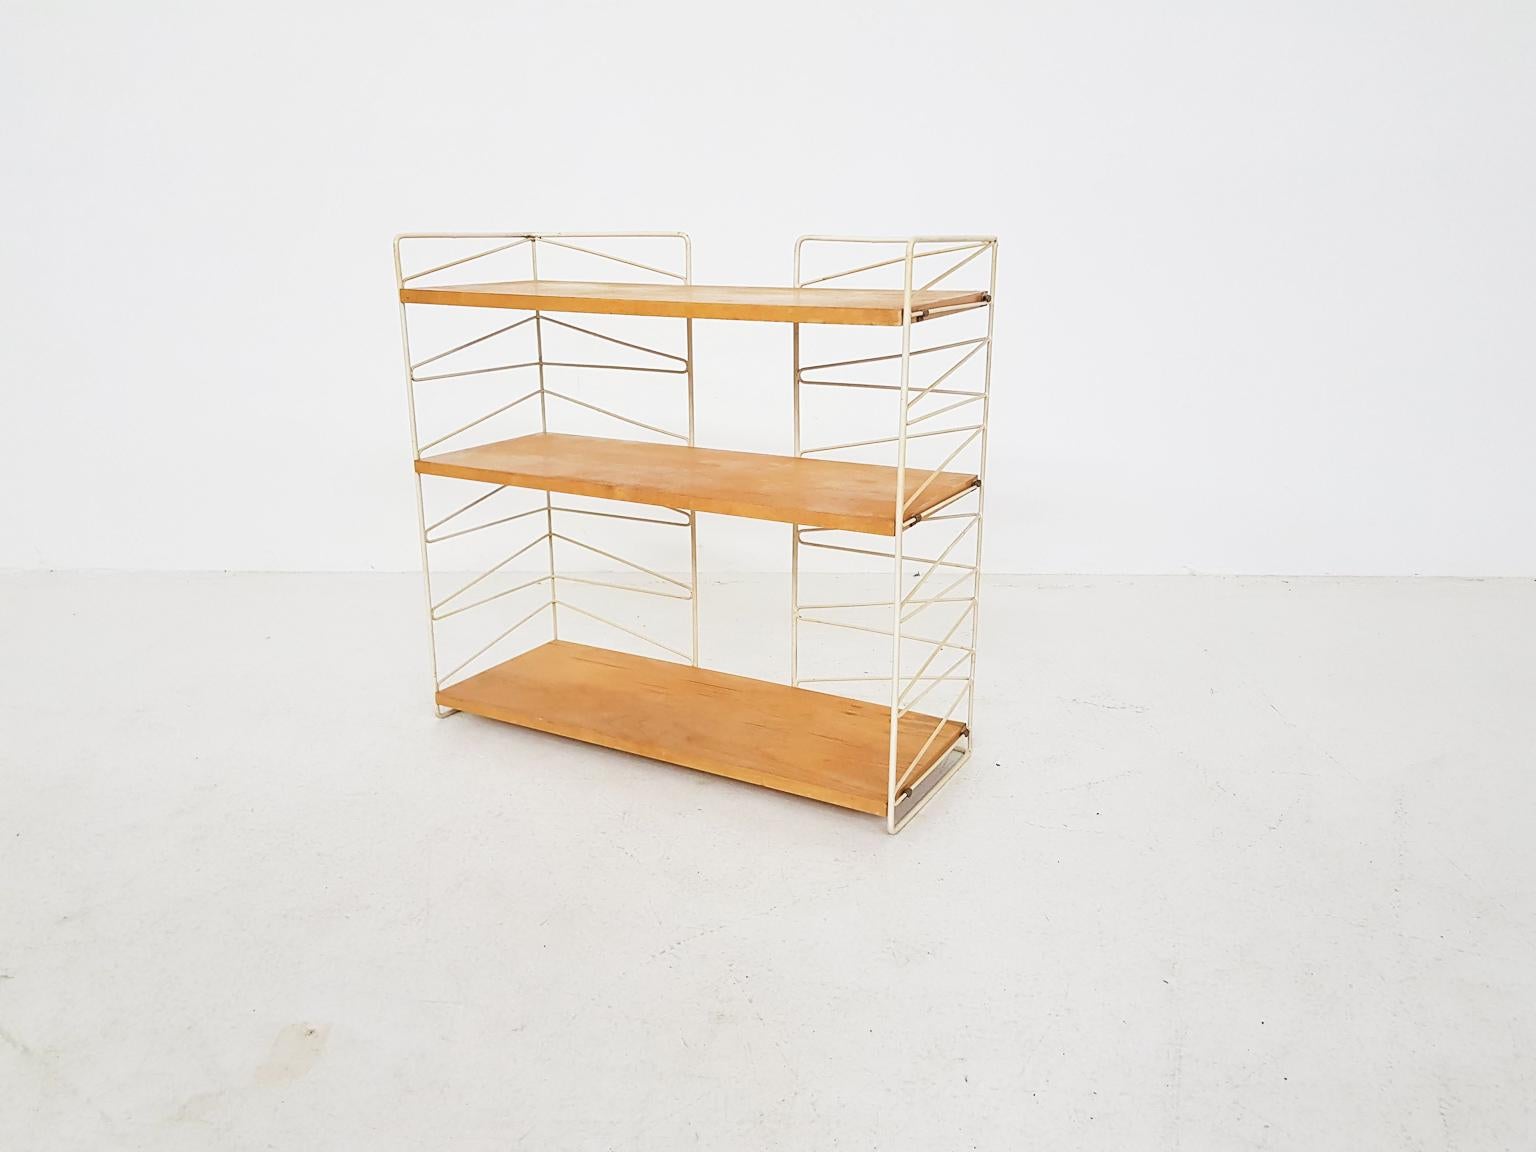 Vintage Nisse Strinning for string pinewood shelving system, Sweden, 1960s

This shelving system with its minimalistic looks, was designed by Swedish architect Nils “Nisse” and his wife Kajsa Strinning in 1949.

White metal risers with three